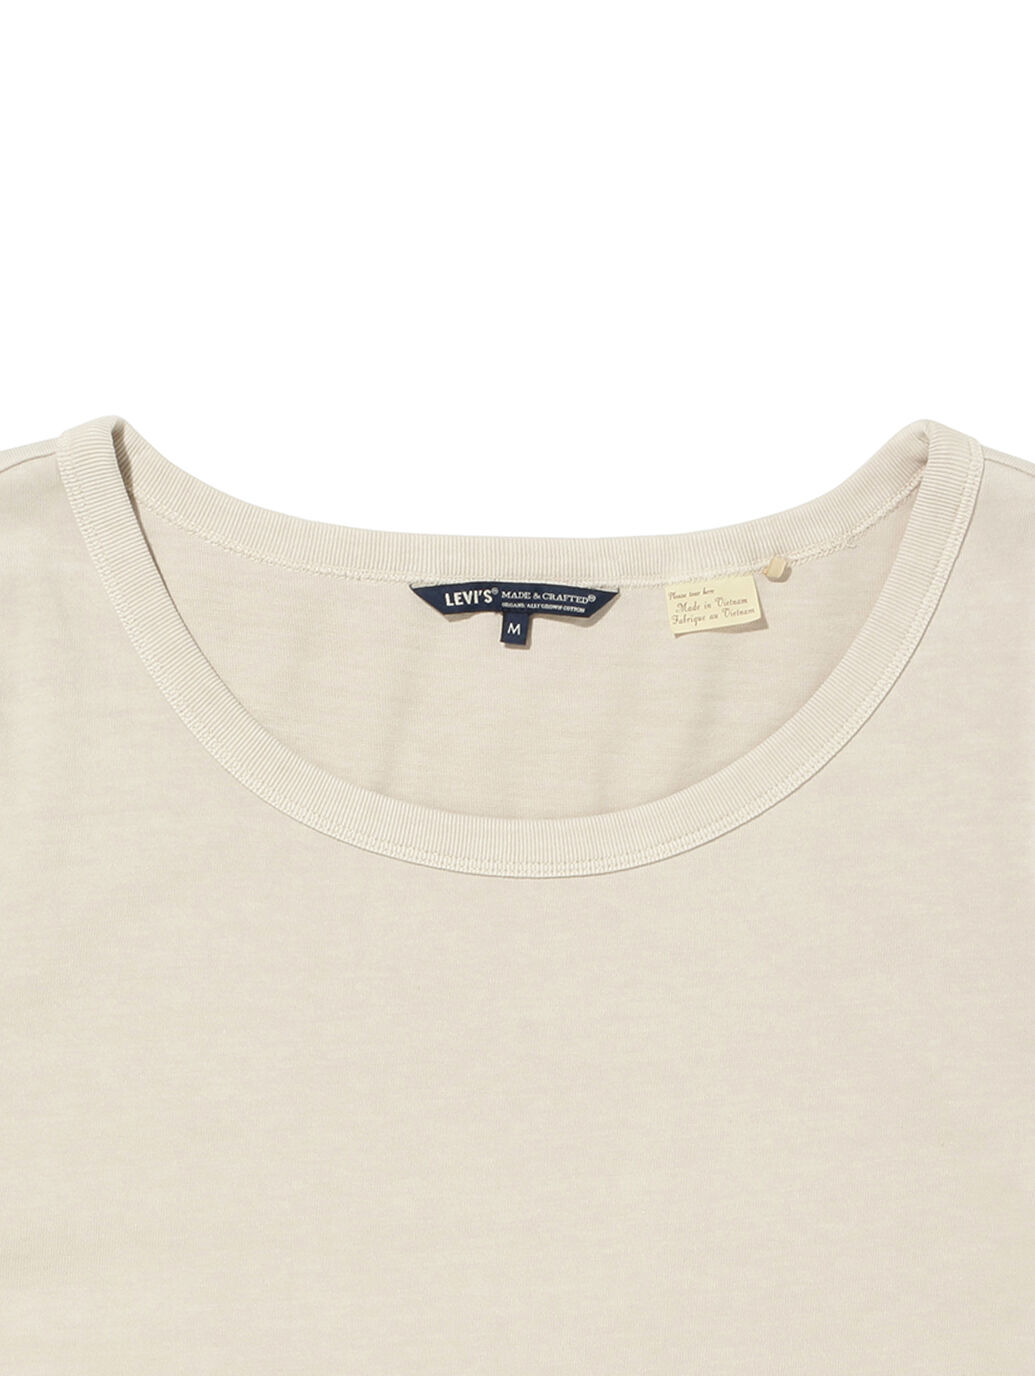 LEVI'S® MADE&CRAFTED®SHOULDER CREW Tシャツ CRYSTAL GRAY